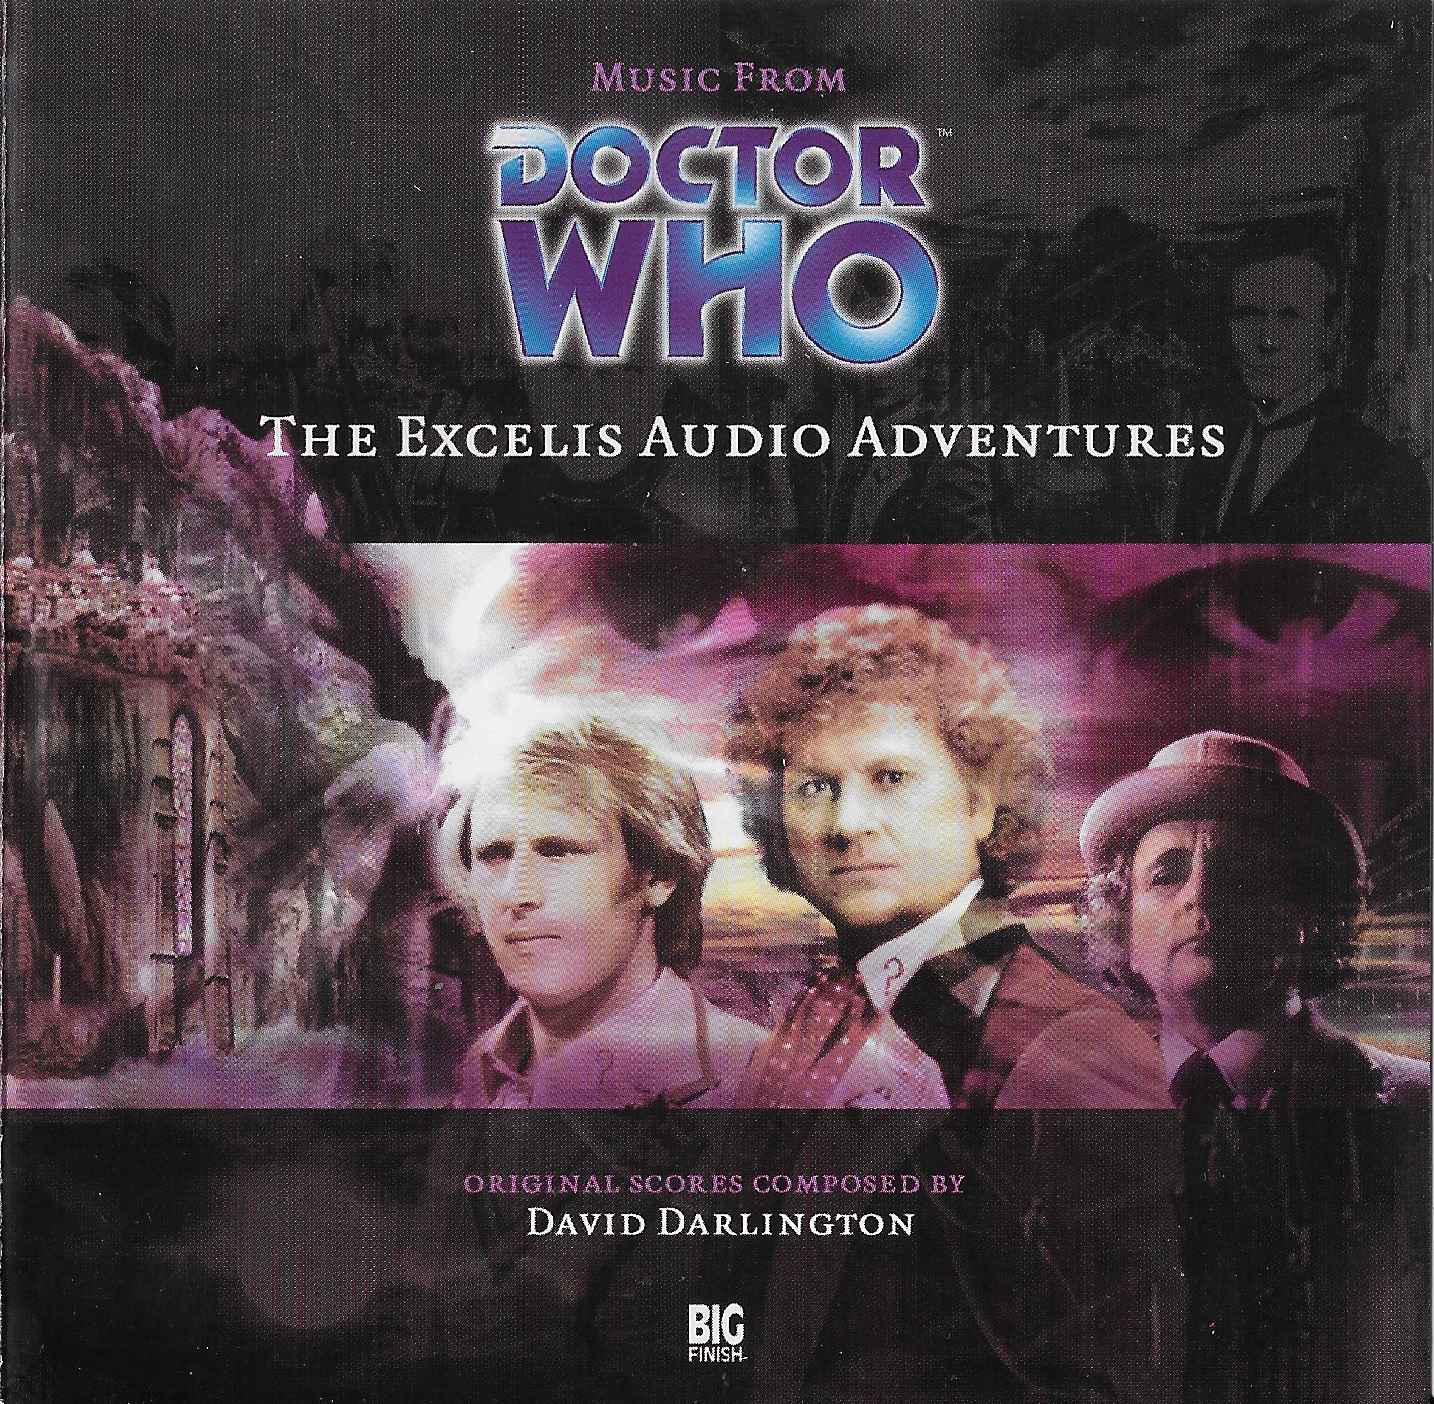 Picture of Doctor Who - Music from the Excelis audio adventures by artist David Darlington from the BBC cds - Records and Tapes library